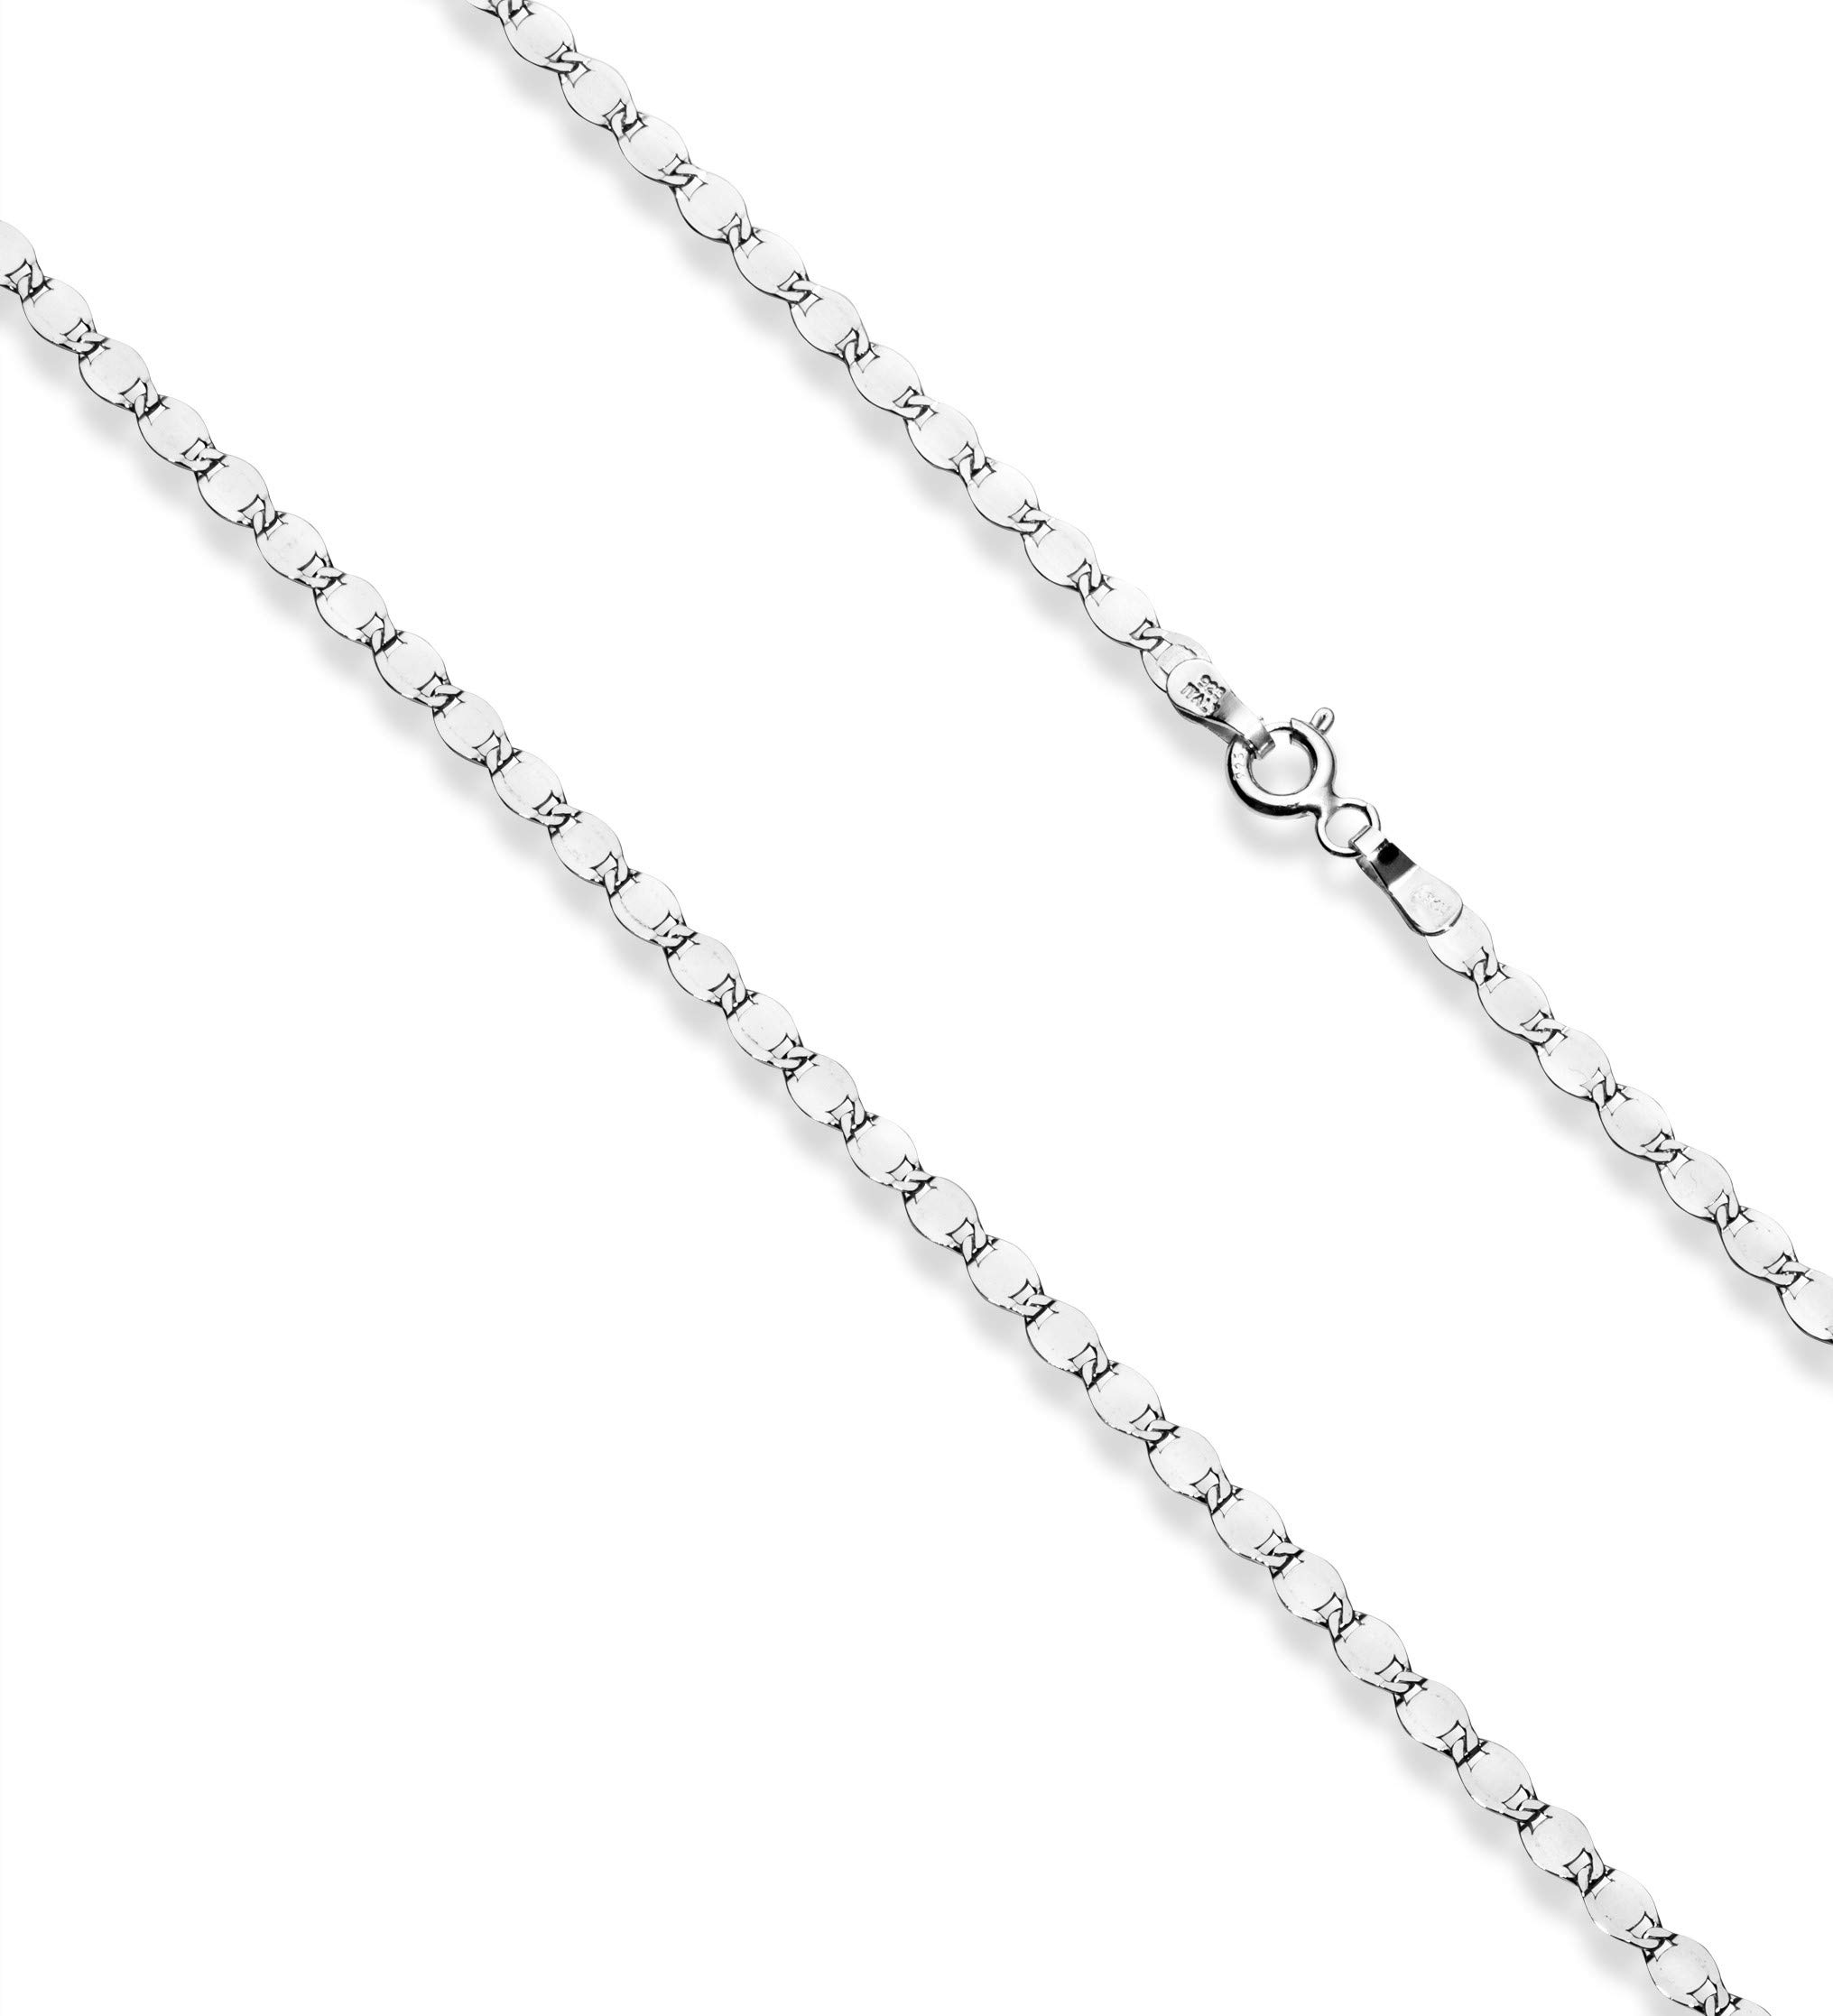 Miabella 925 Sterling Silver Italian Sparkle Mirror Link Chain Necklace for Women Teen Girls, Made in Italy